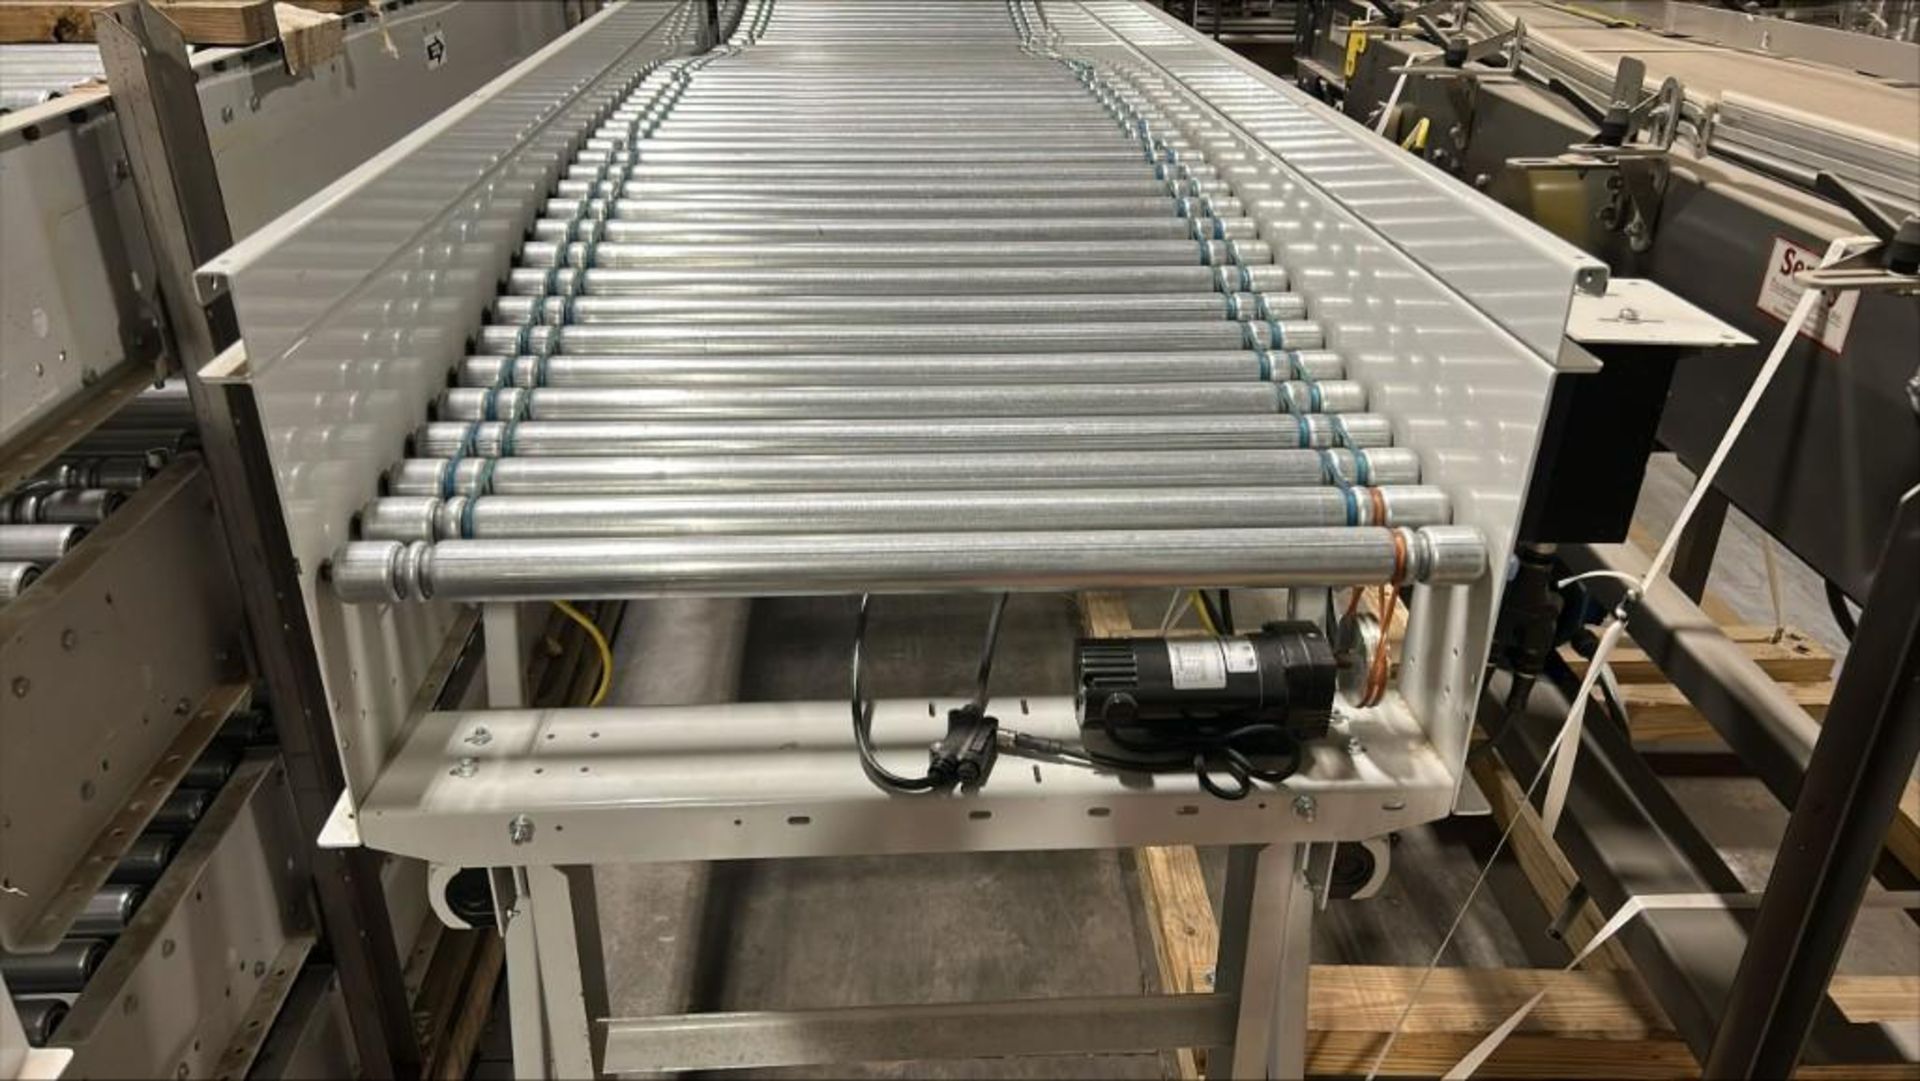 Powered Arch Roller Band Conveyor 10'L x 36" W - Image 3 of 3